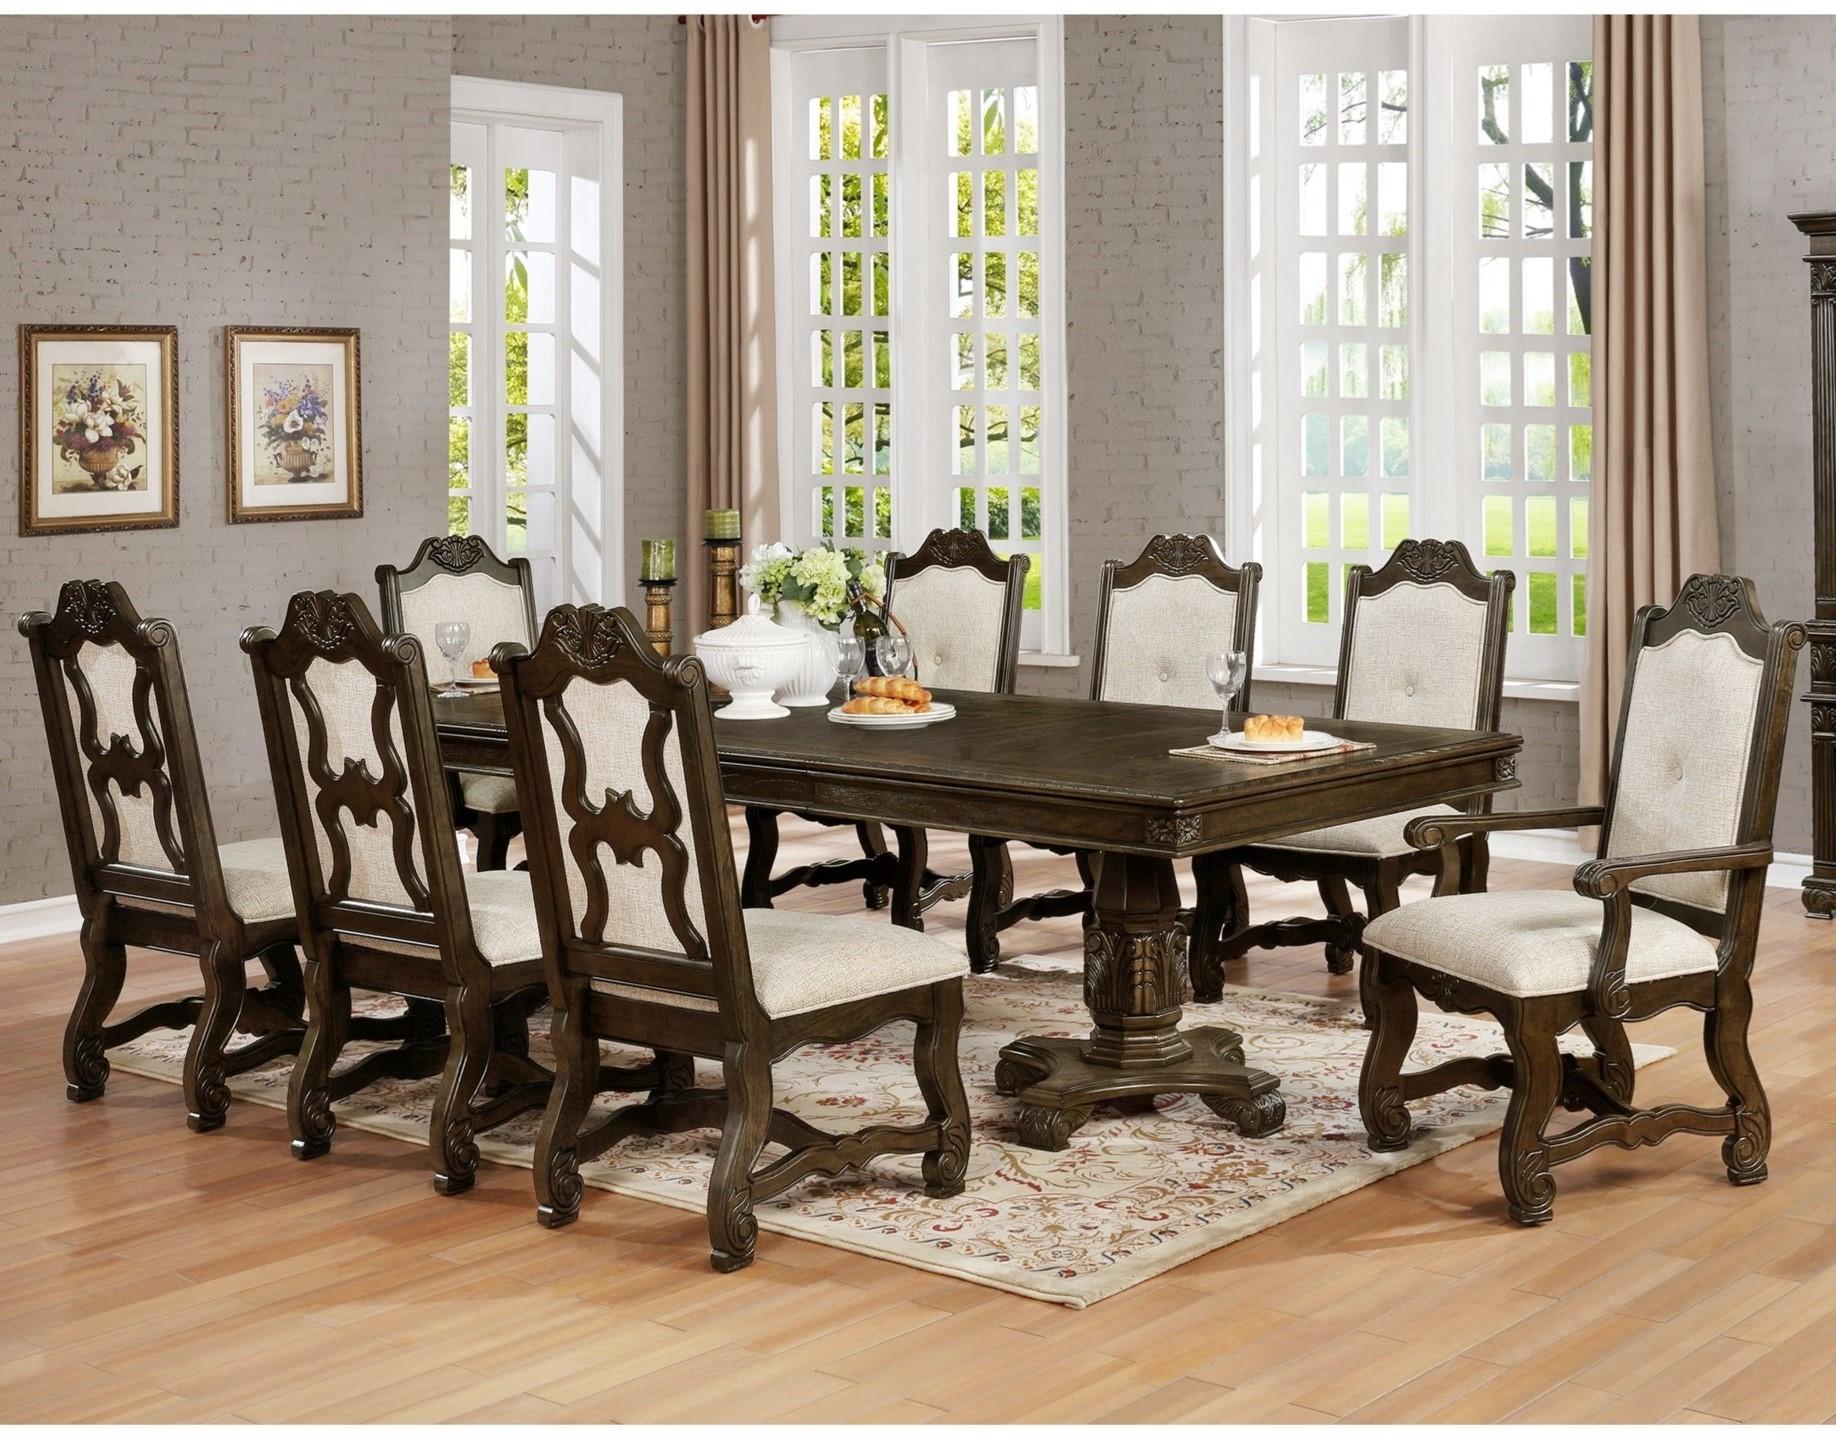 Traditional, Vintage Dining Room Set Neo Renaissance 2420T-44108-9pcs in Rustic Brown 